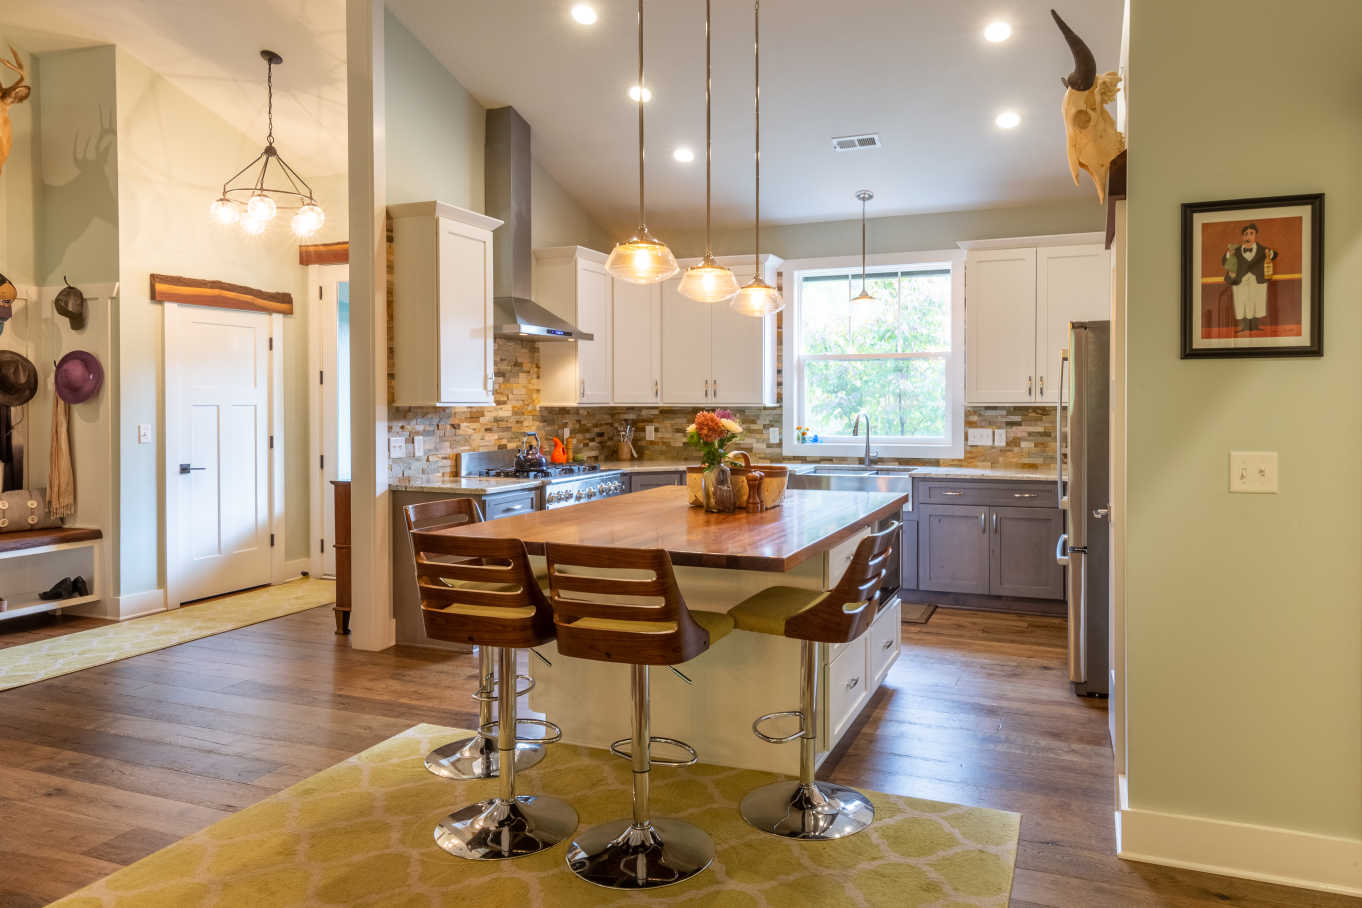 Dark wood floors, extra tall ceilings, and custom trim made from recycled barn wood elevate the kitchen of this Dog Series plan.